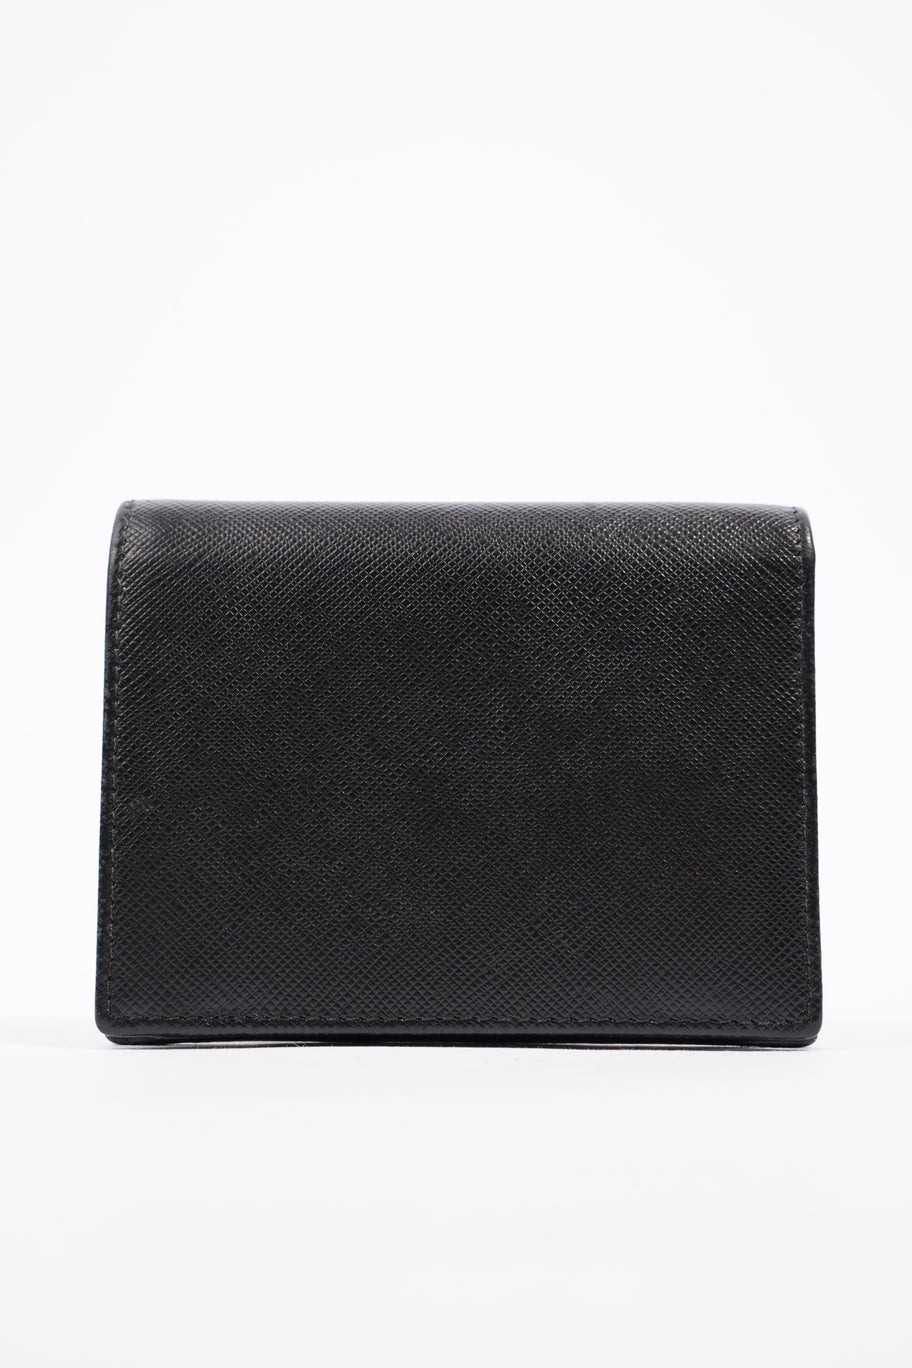 Compact Wallet Black Saffiano Leather Image 3